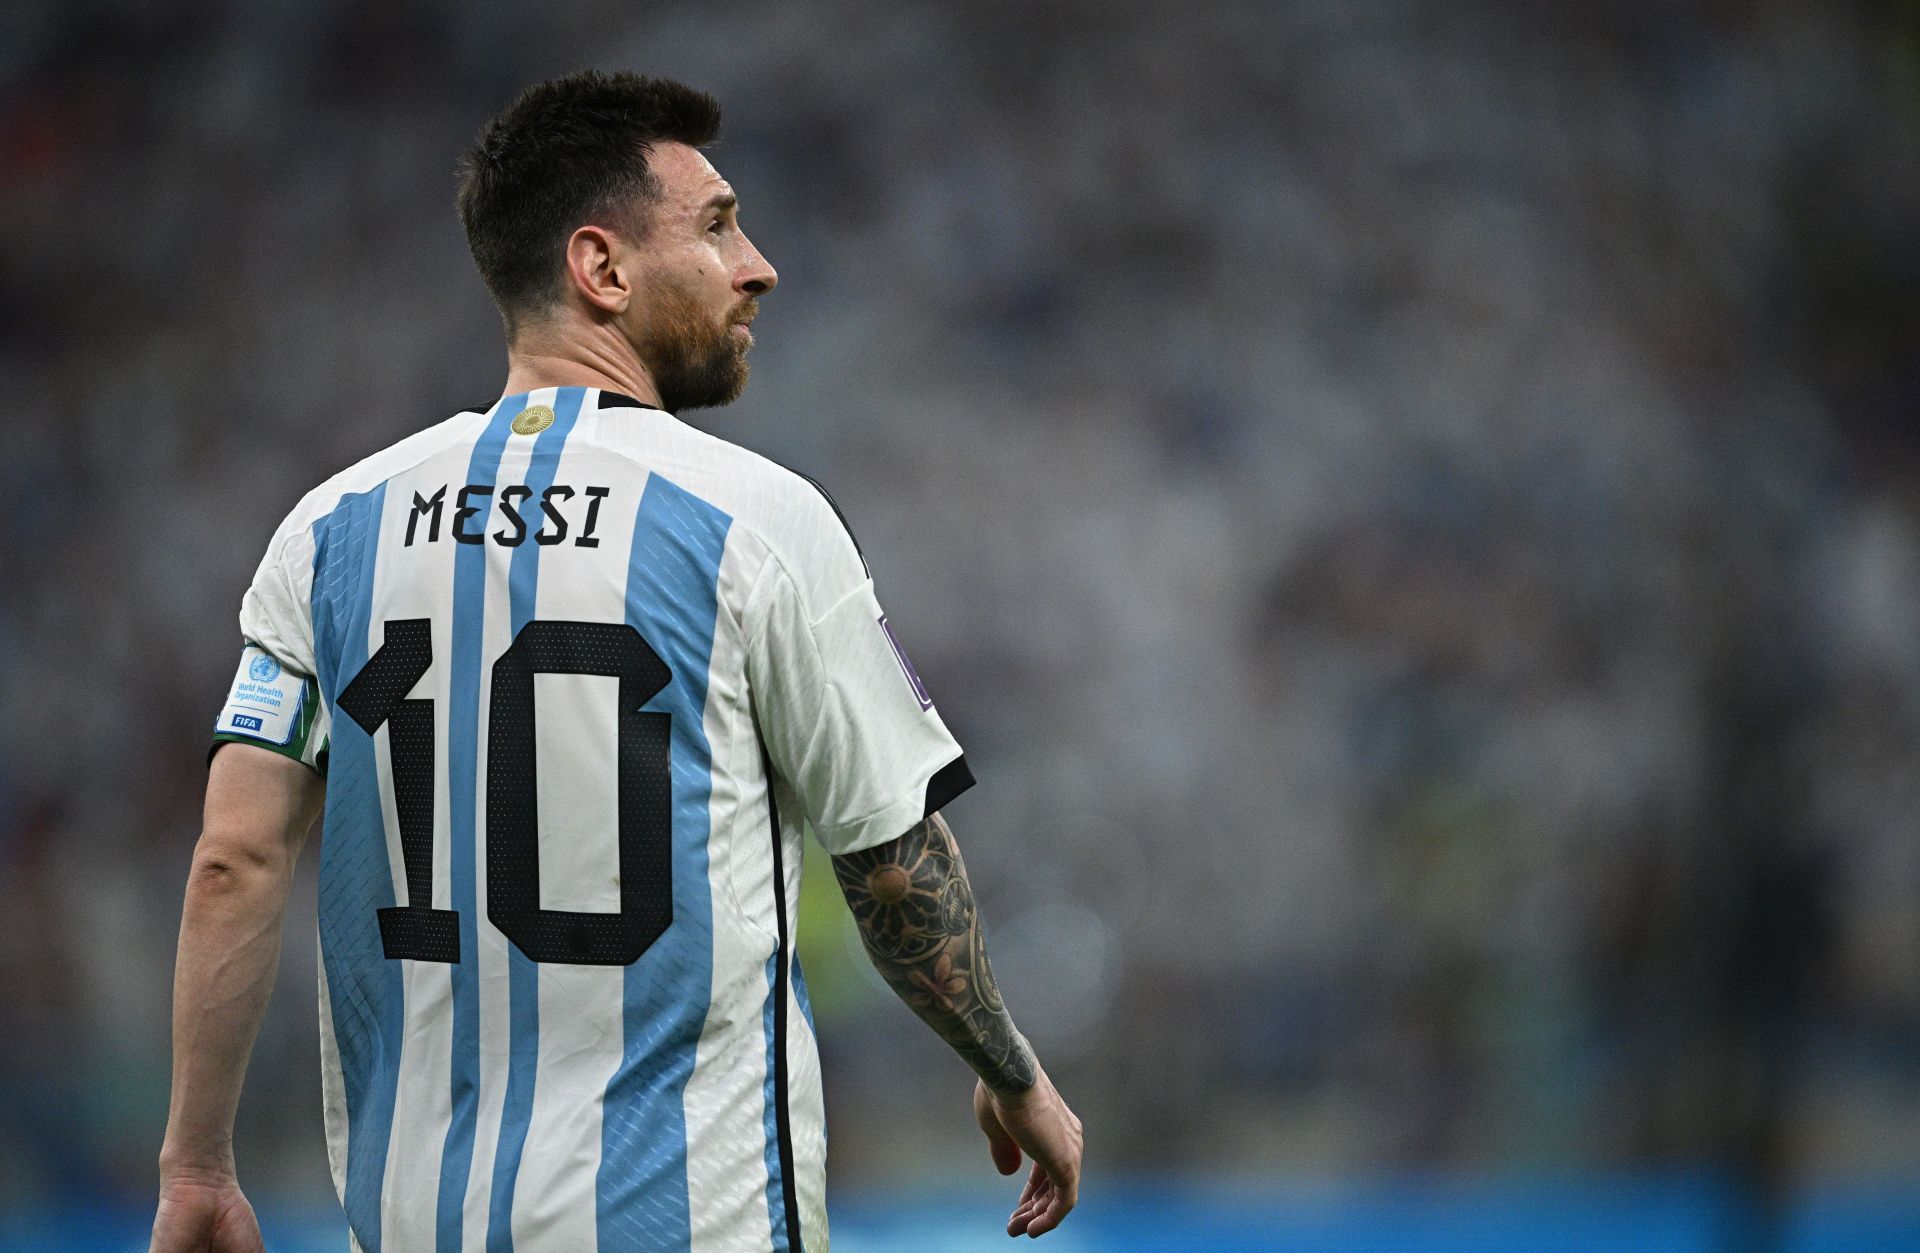 Messi against Mexico: Group C - FIFA World Cup Qatar 2022